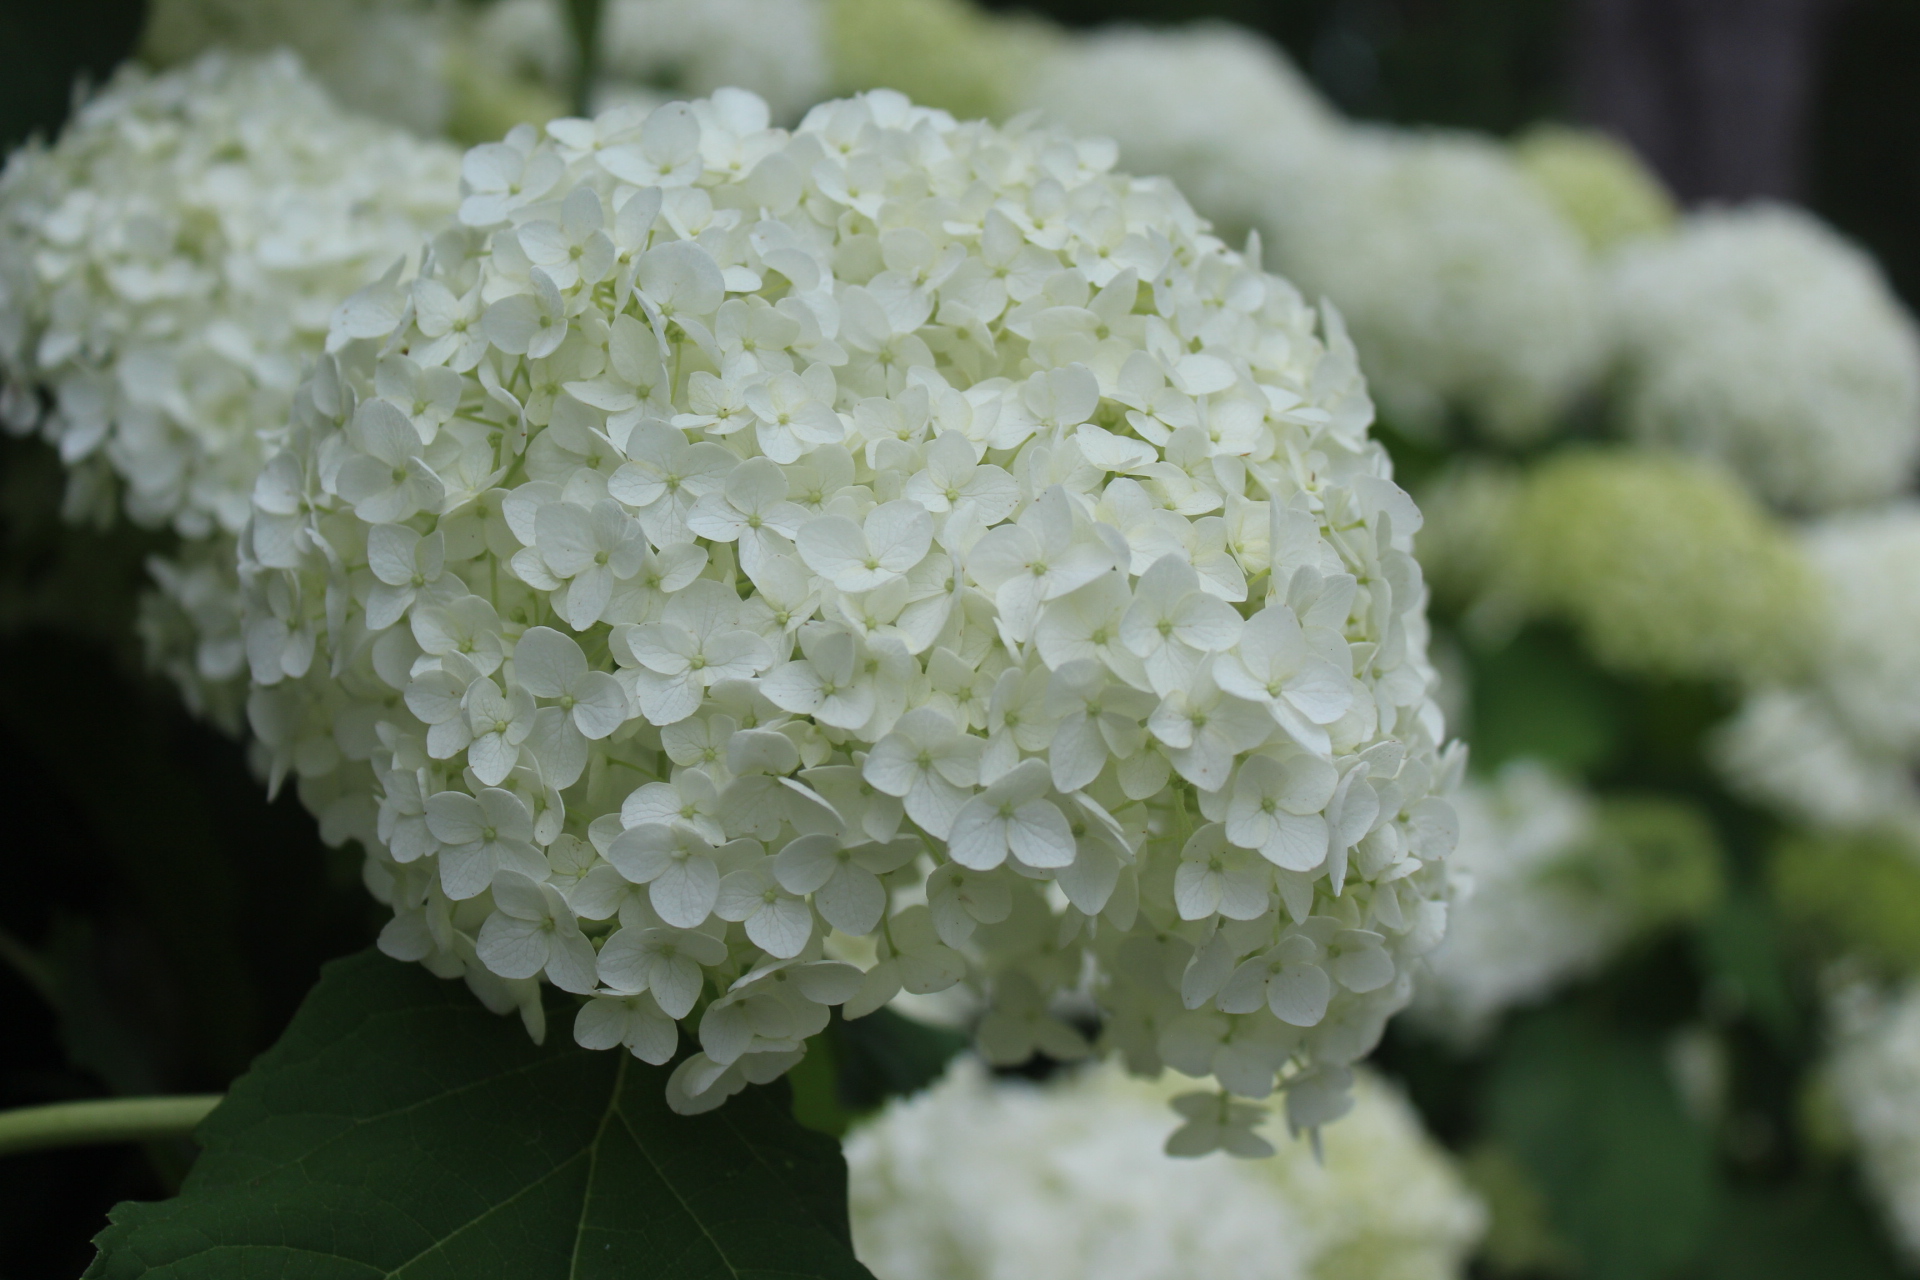 Hydrangea arborescens 'Annabelle'  is an old favorite. It grows 3-5' x 4-6' and can flop when it rains. Pruning hard (cut back to 6”) in late fall or early spring helps to encourage strong stems and bigger blooms. It blooms on new wood. Newer cultivars like 'Incrediball' and 'Invincibelle Spirit' have bigger blooms (basketball size) and stronger stems.